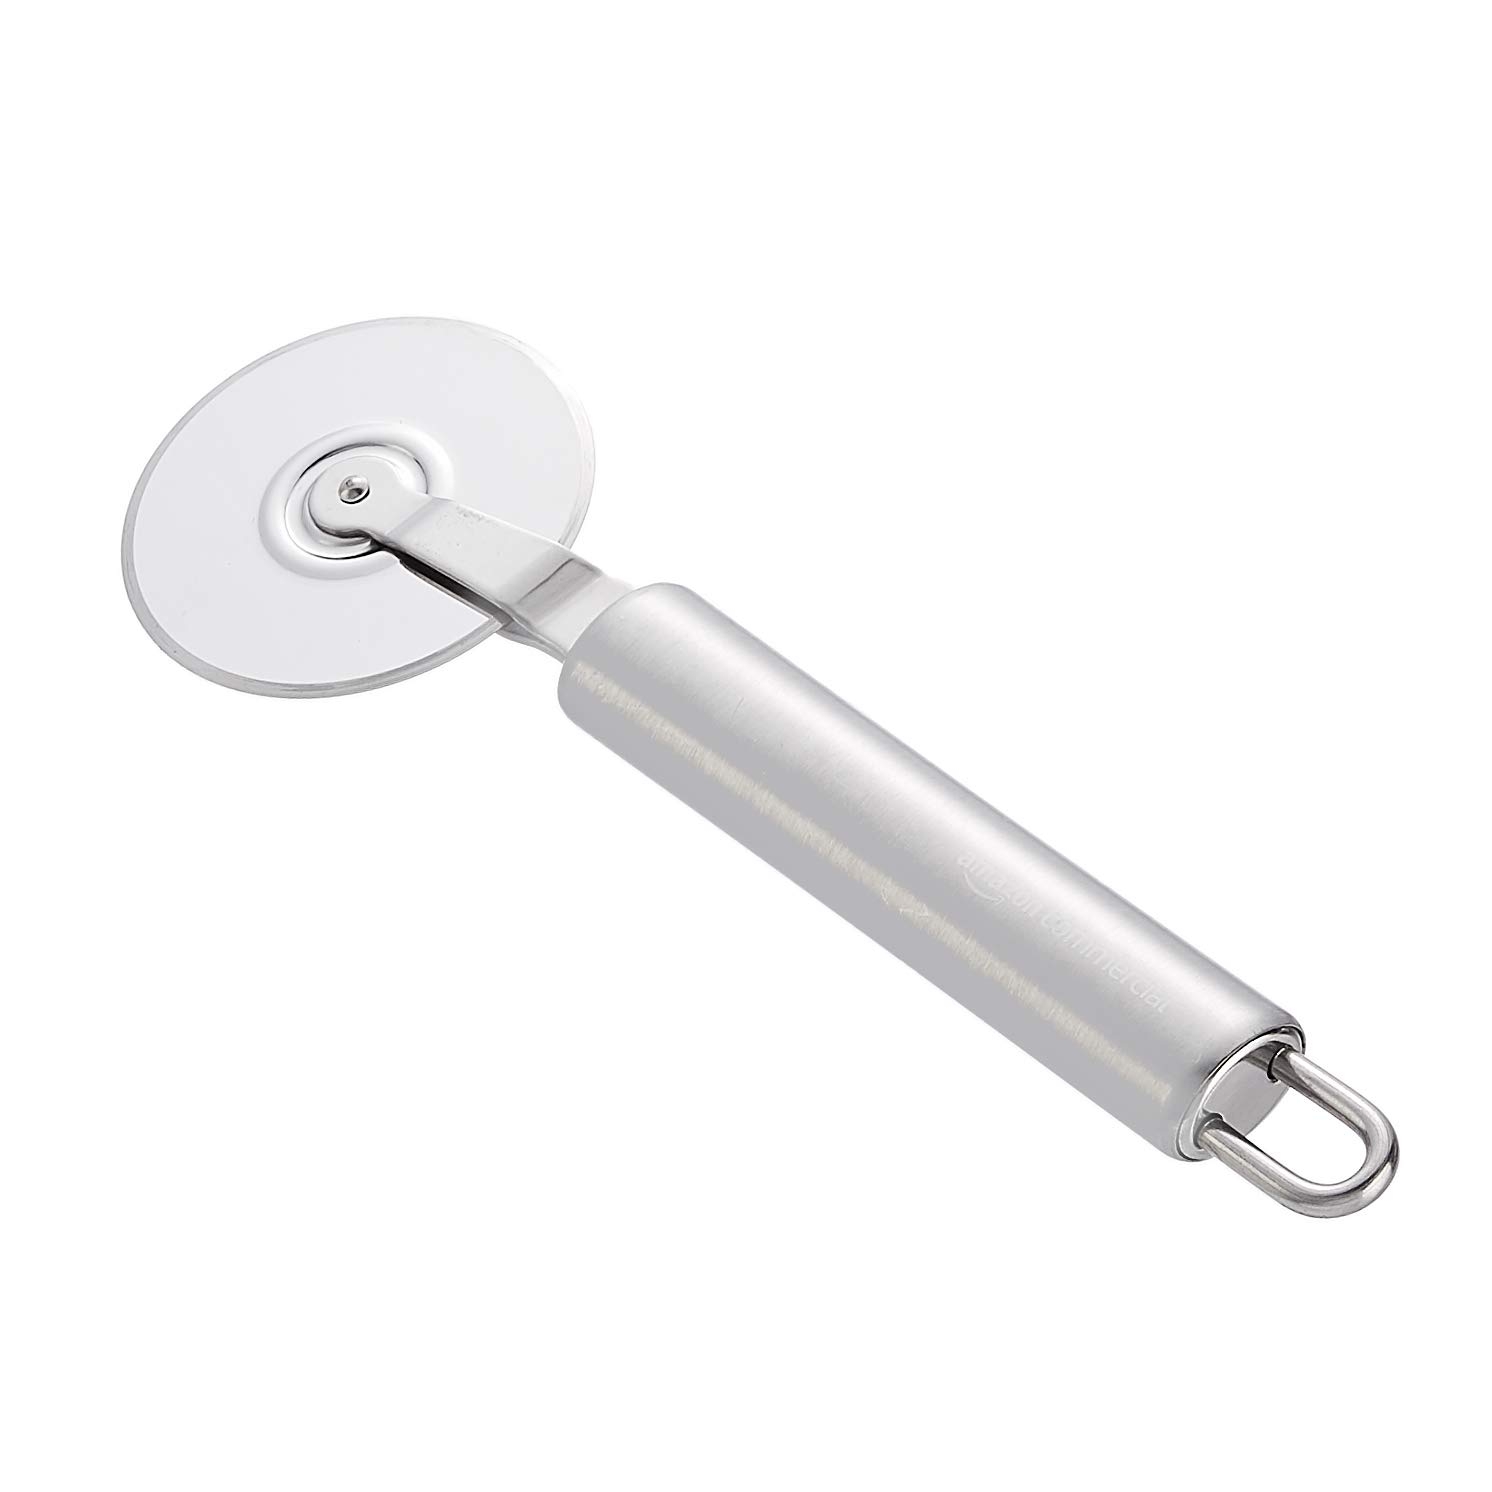 AmazonCommercial Stainless Steel Pizza Cutter, 2.37 Inch Import To Shop ×Product customization General Description Gallery